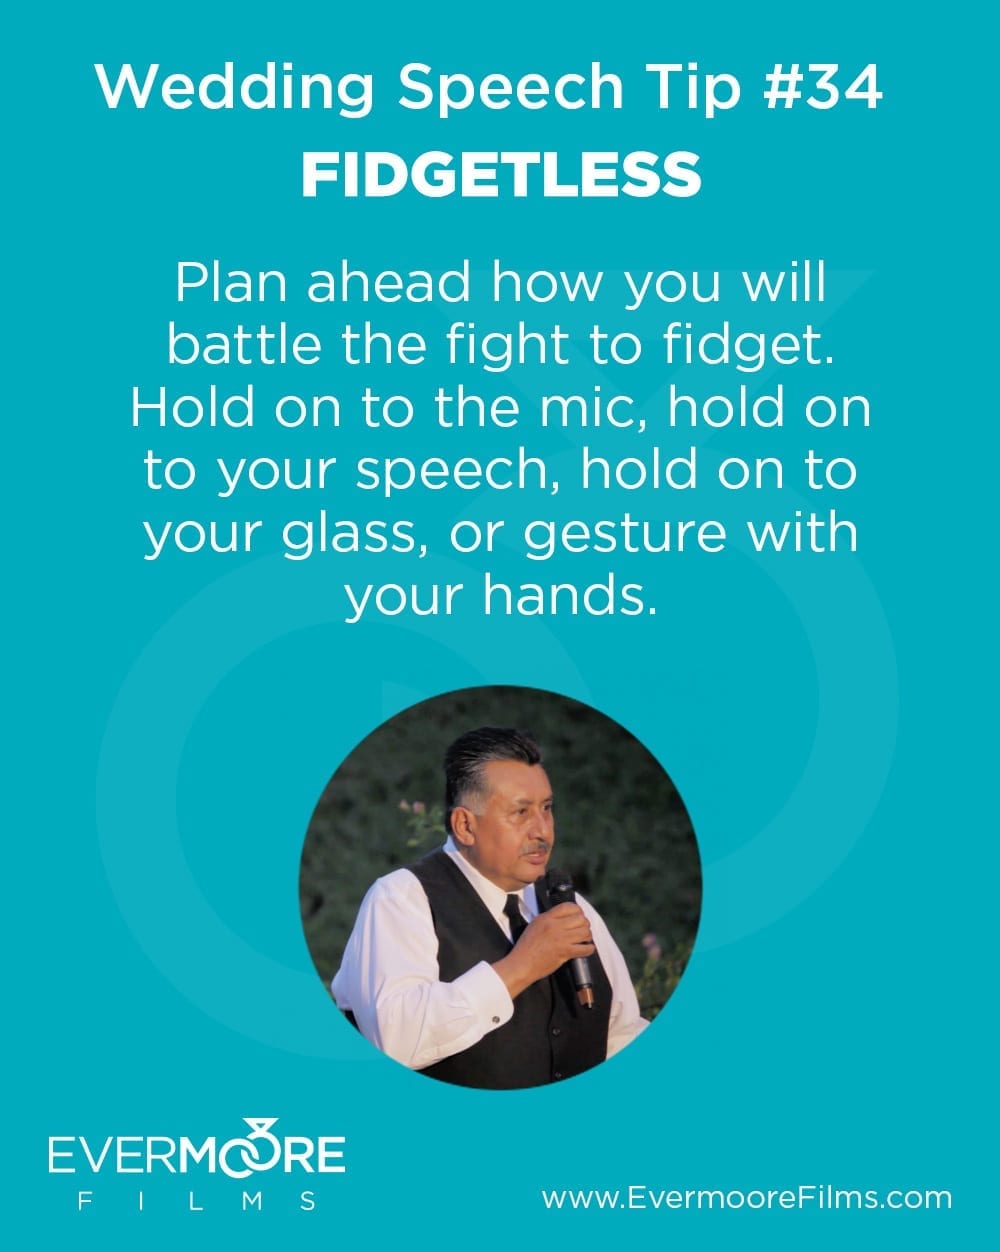 Fidgetless | Wedding Speech Tip #34 | Evermoore Films | Plan ahead how you will battle the fight to fidget. Hold on to the mic, hold on to your speech, hold on to your glass, or gesture with your hands. 